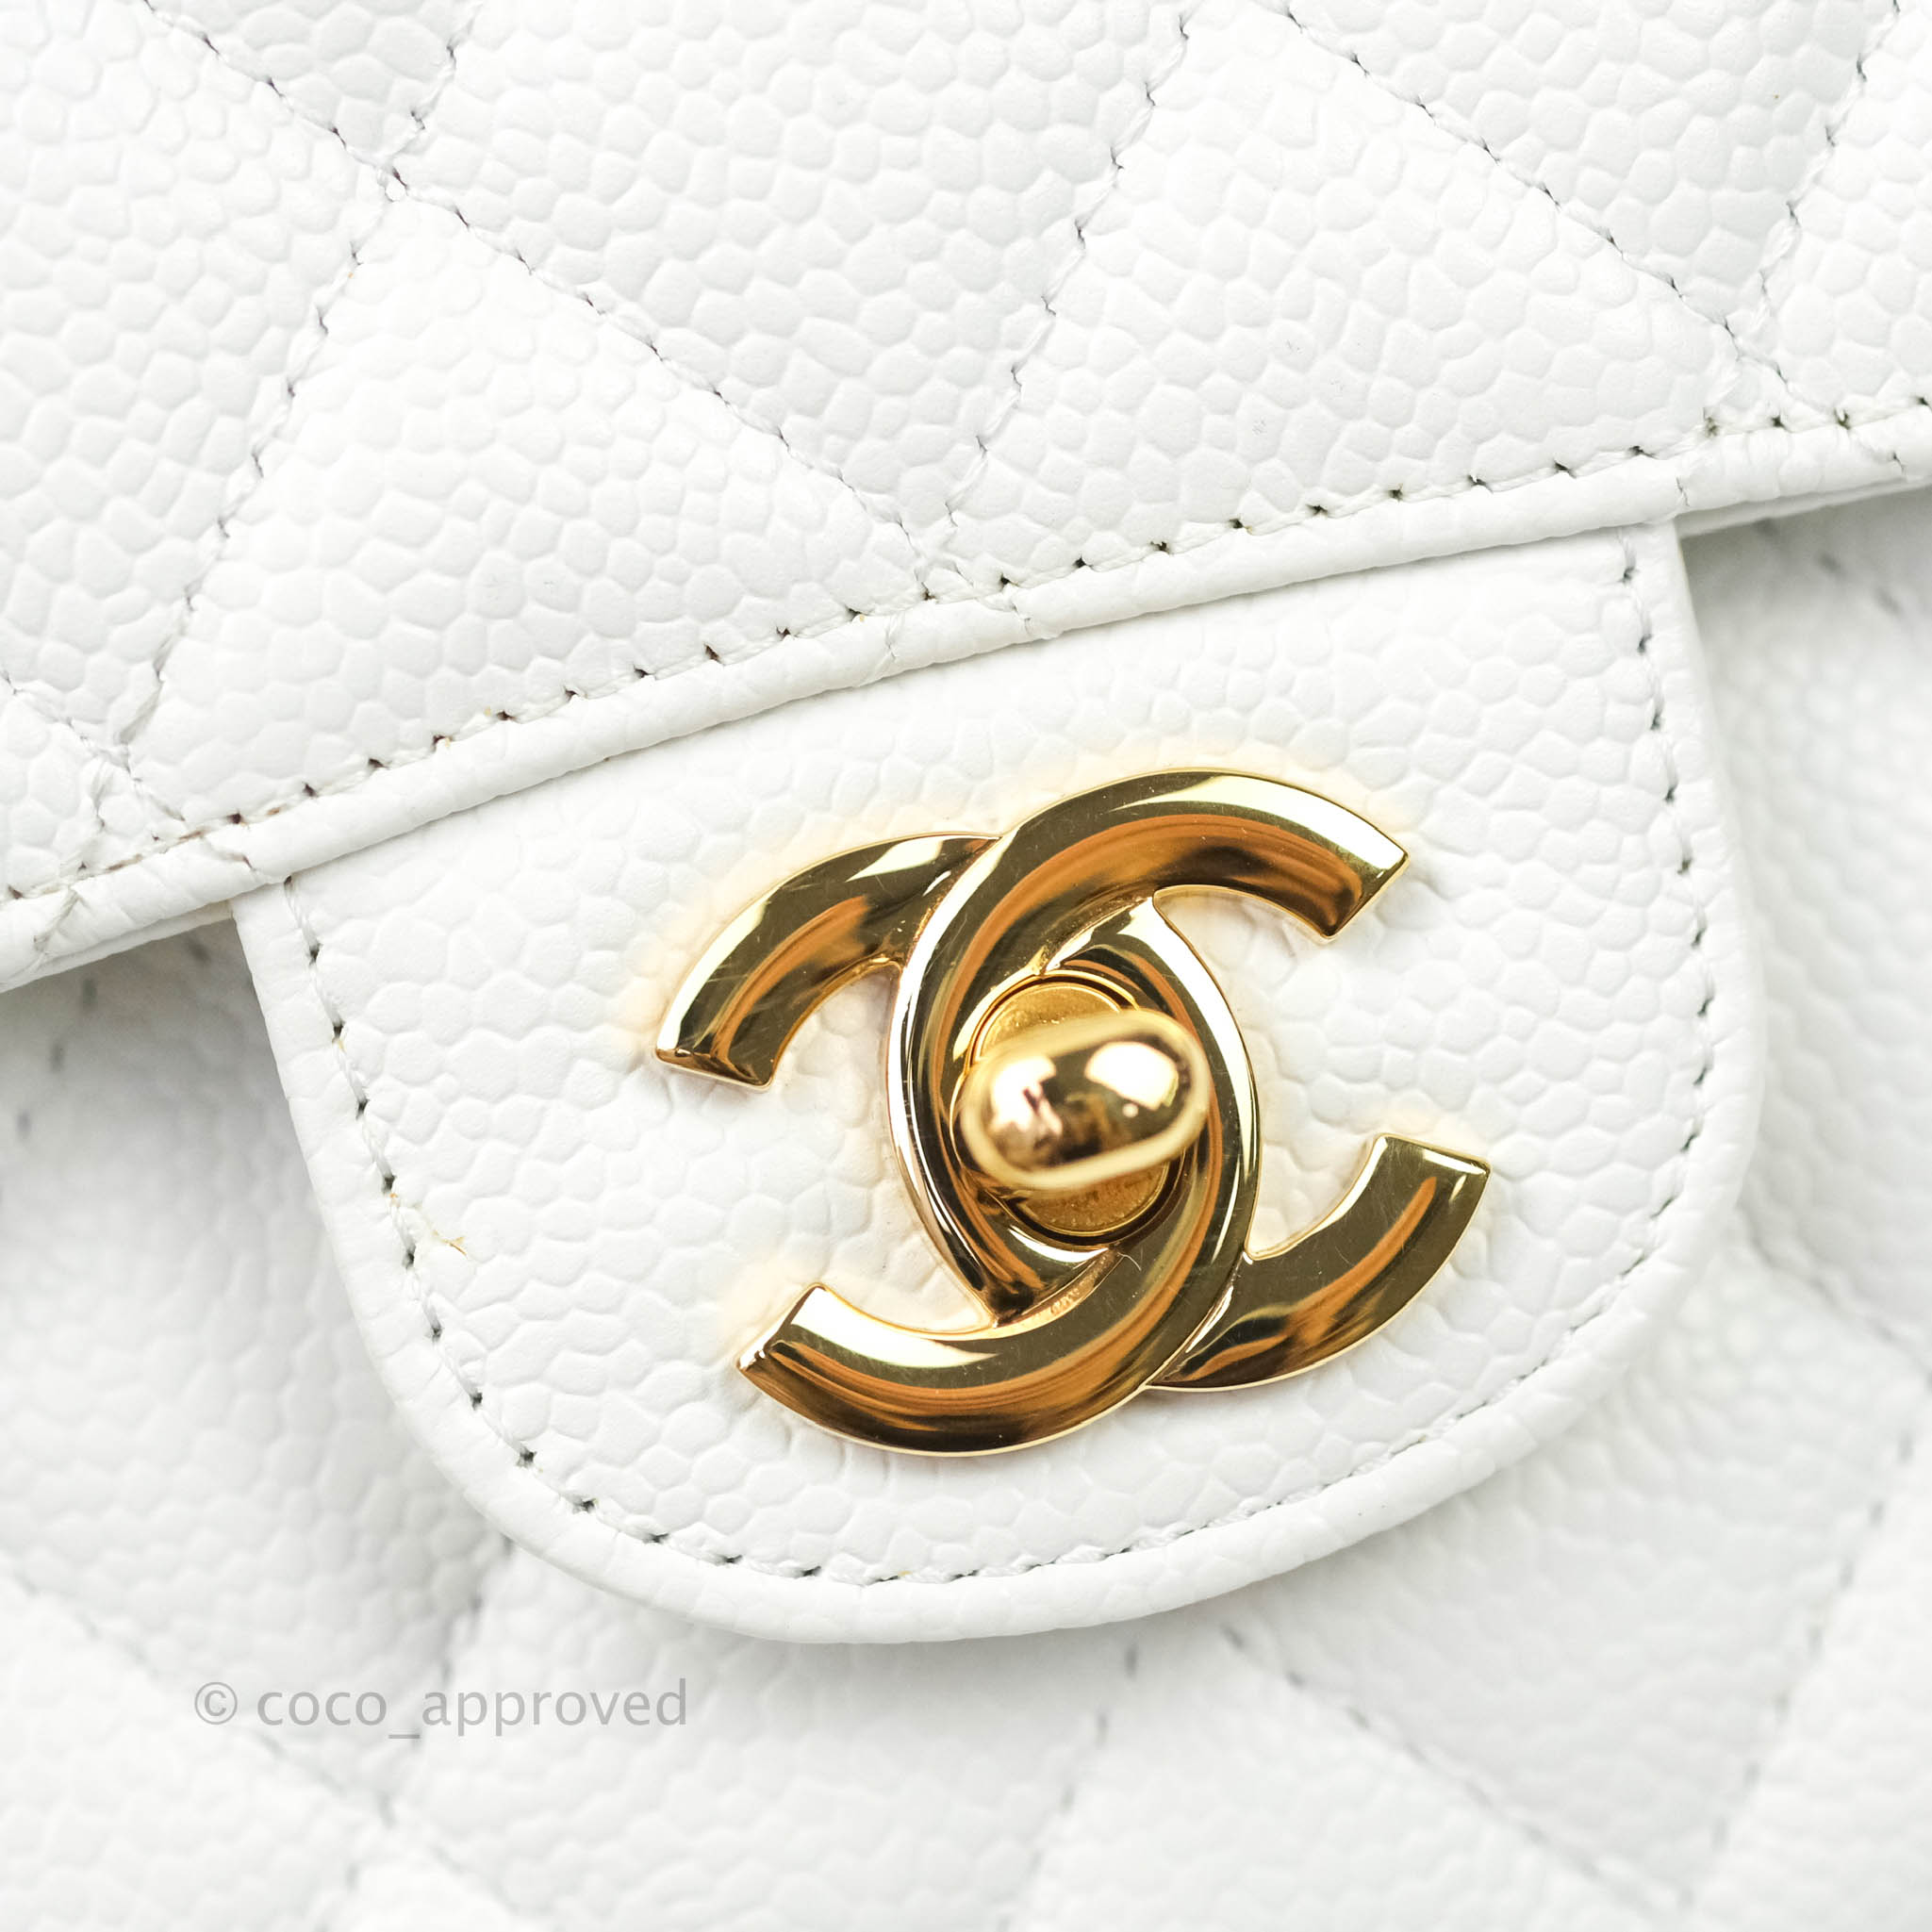 Chanel Classic Medium Double Flap 20B White Quilted Caviar with silver  hardware - VLuxeStyle